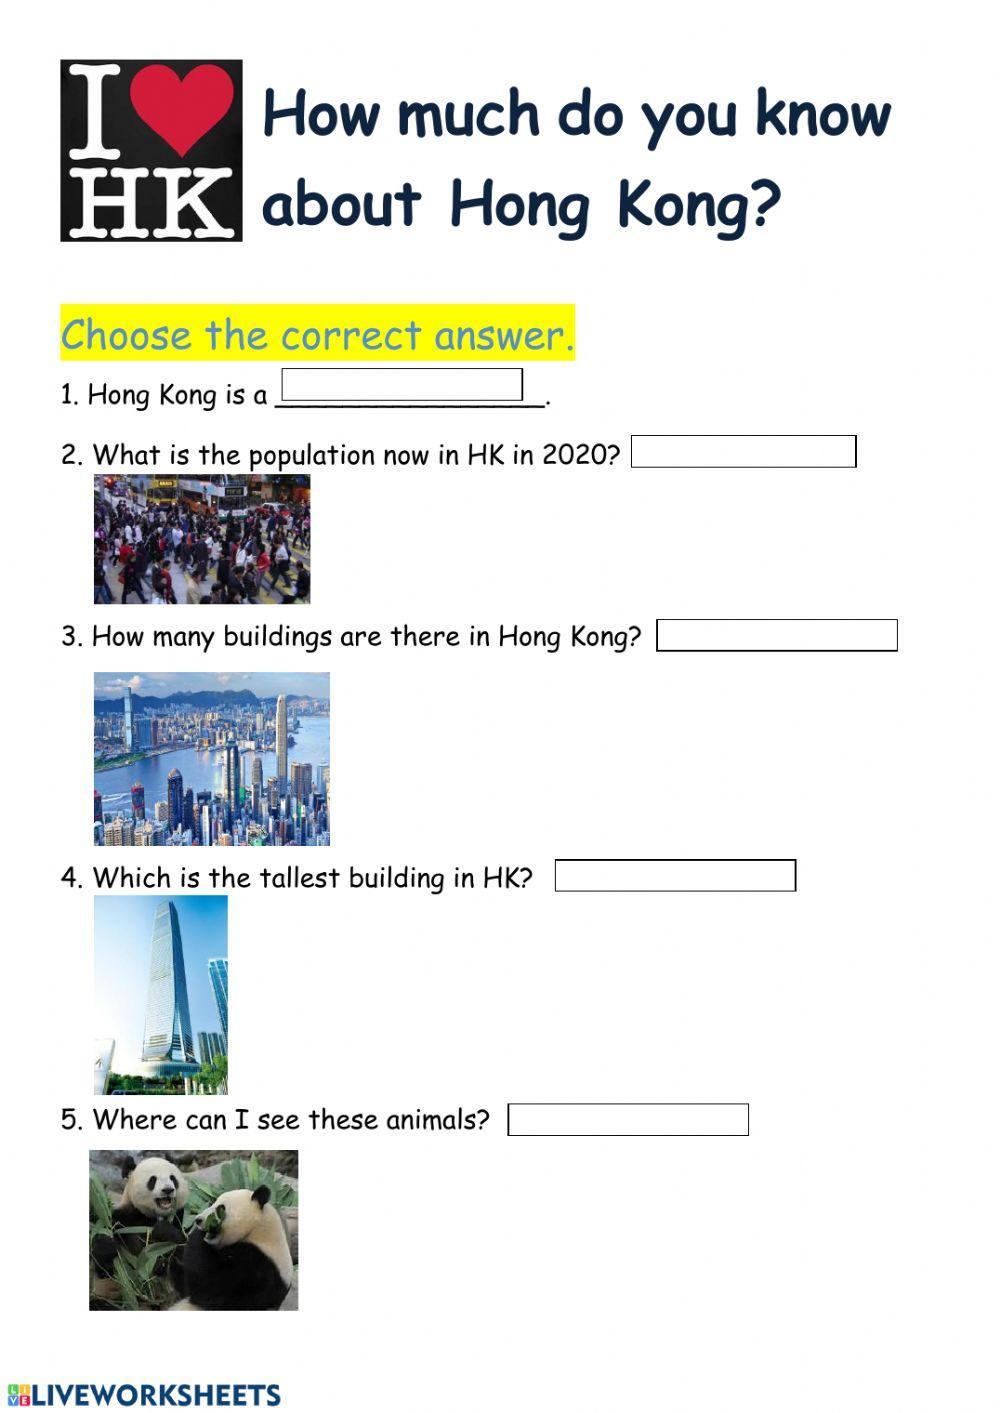 How much do you know about HK